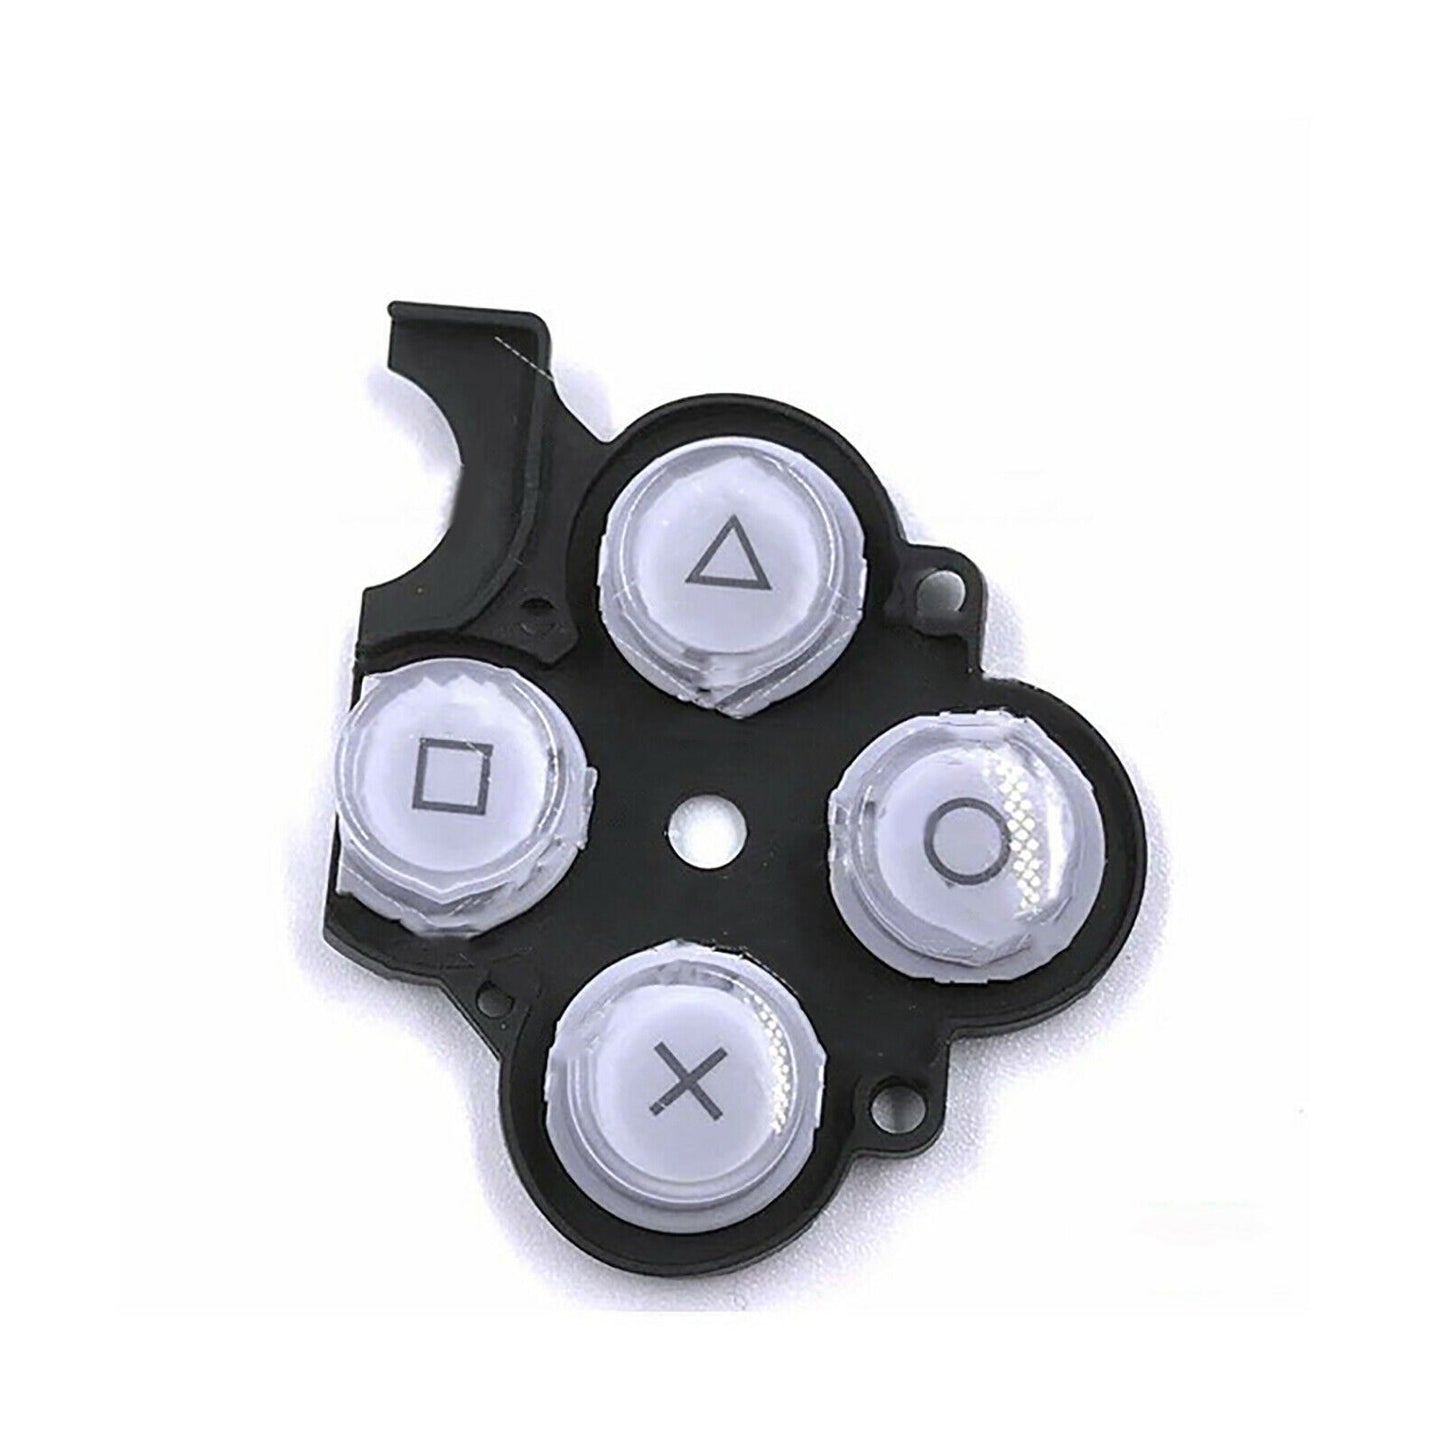 for Sony PSP 2000 3000 Series - Replacement Button Set Kit  | FPC